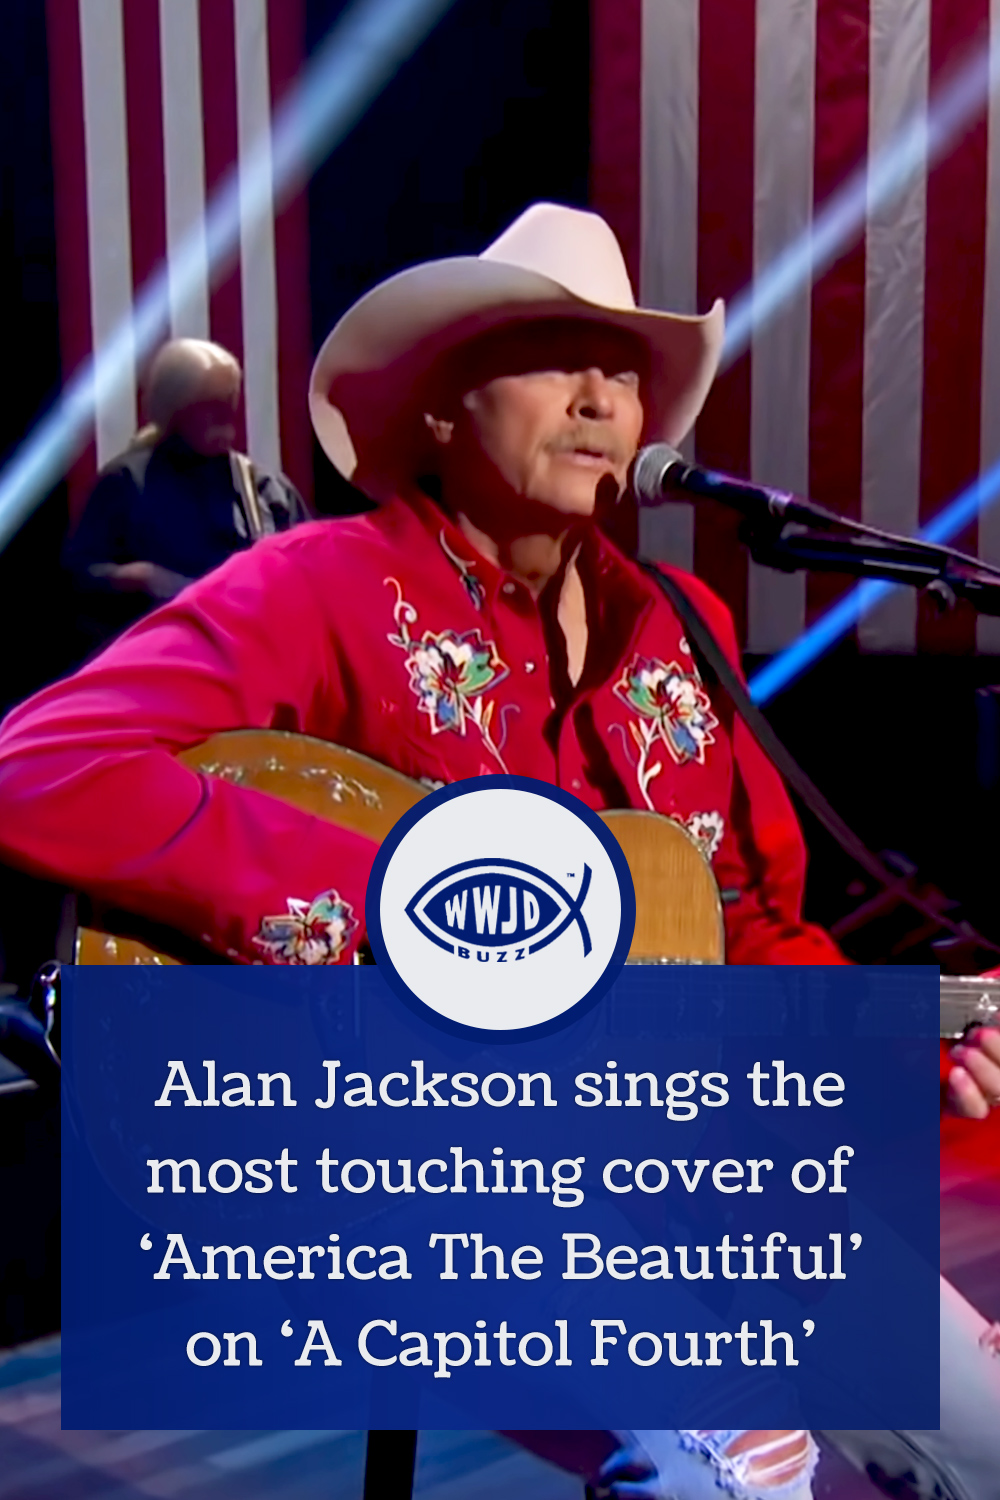 Alan Jackson sings the most touching cover of ‘America The Beautiful’ on ‘A Capitol Fourth’